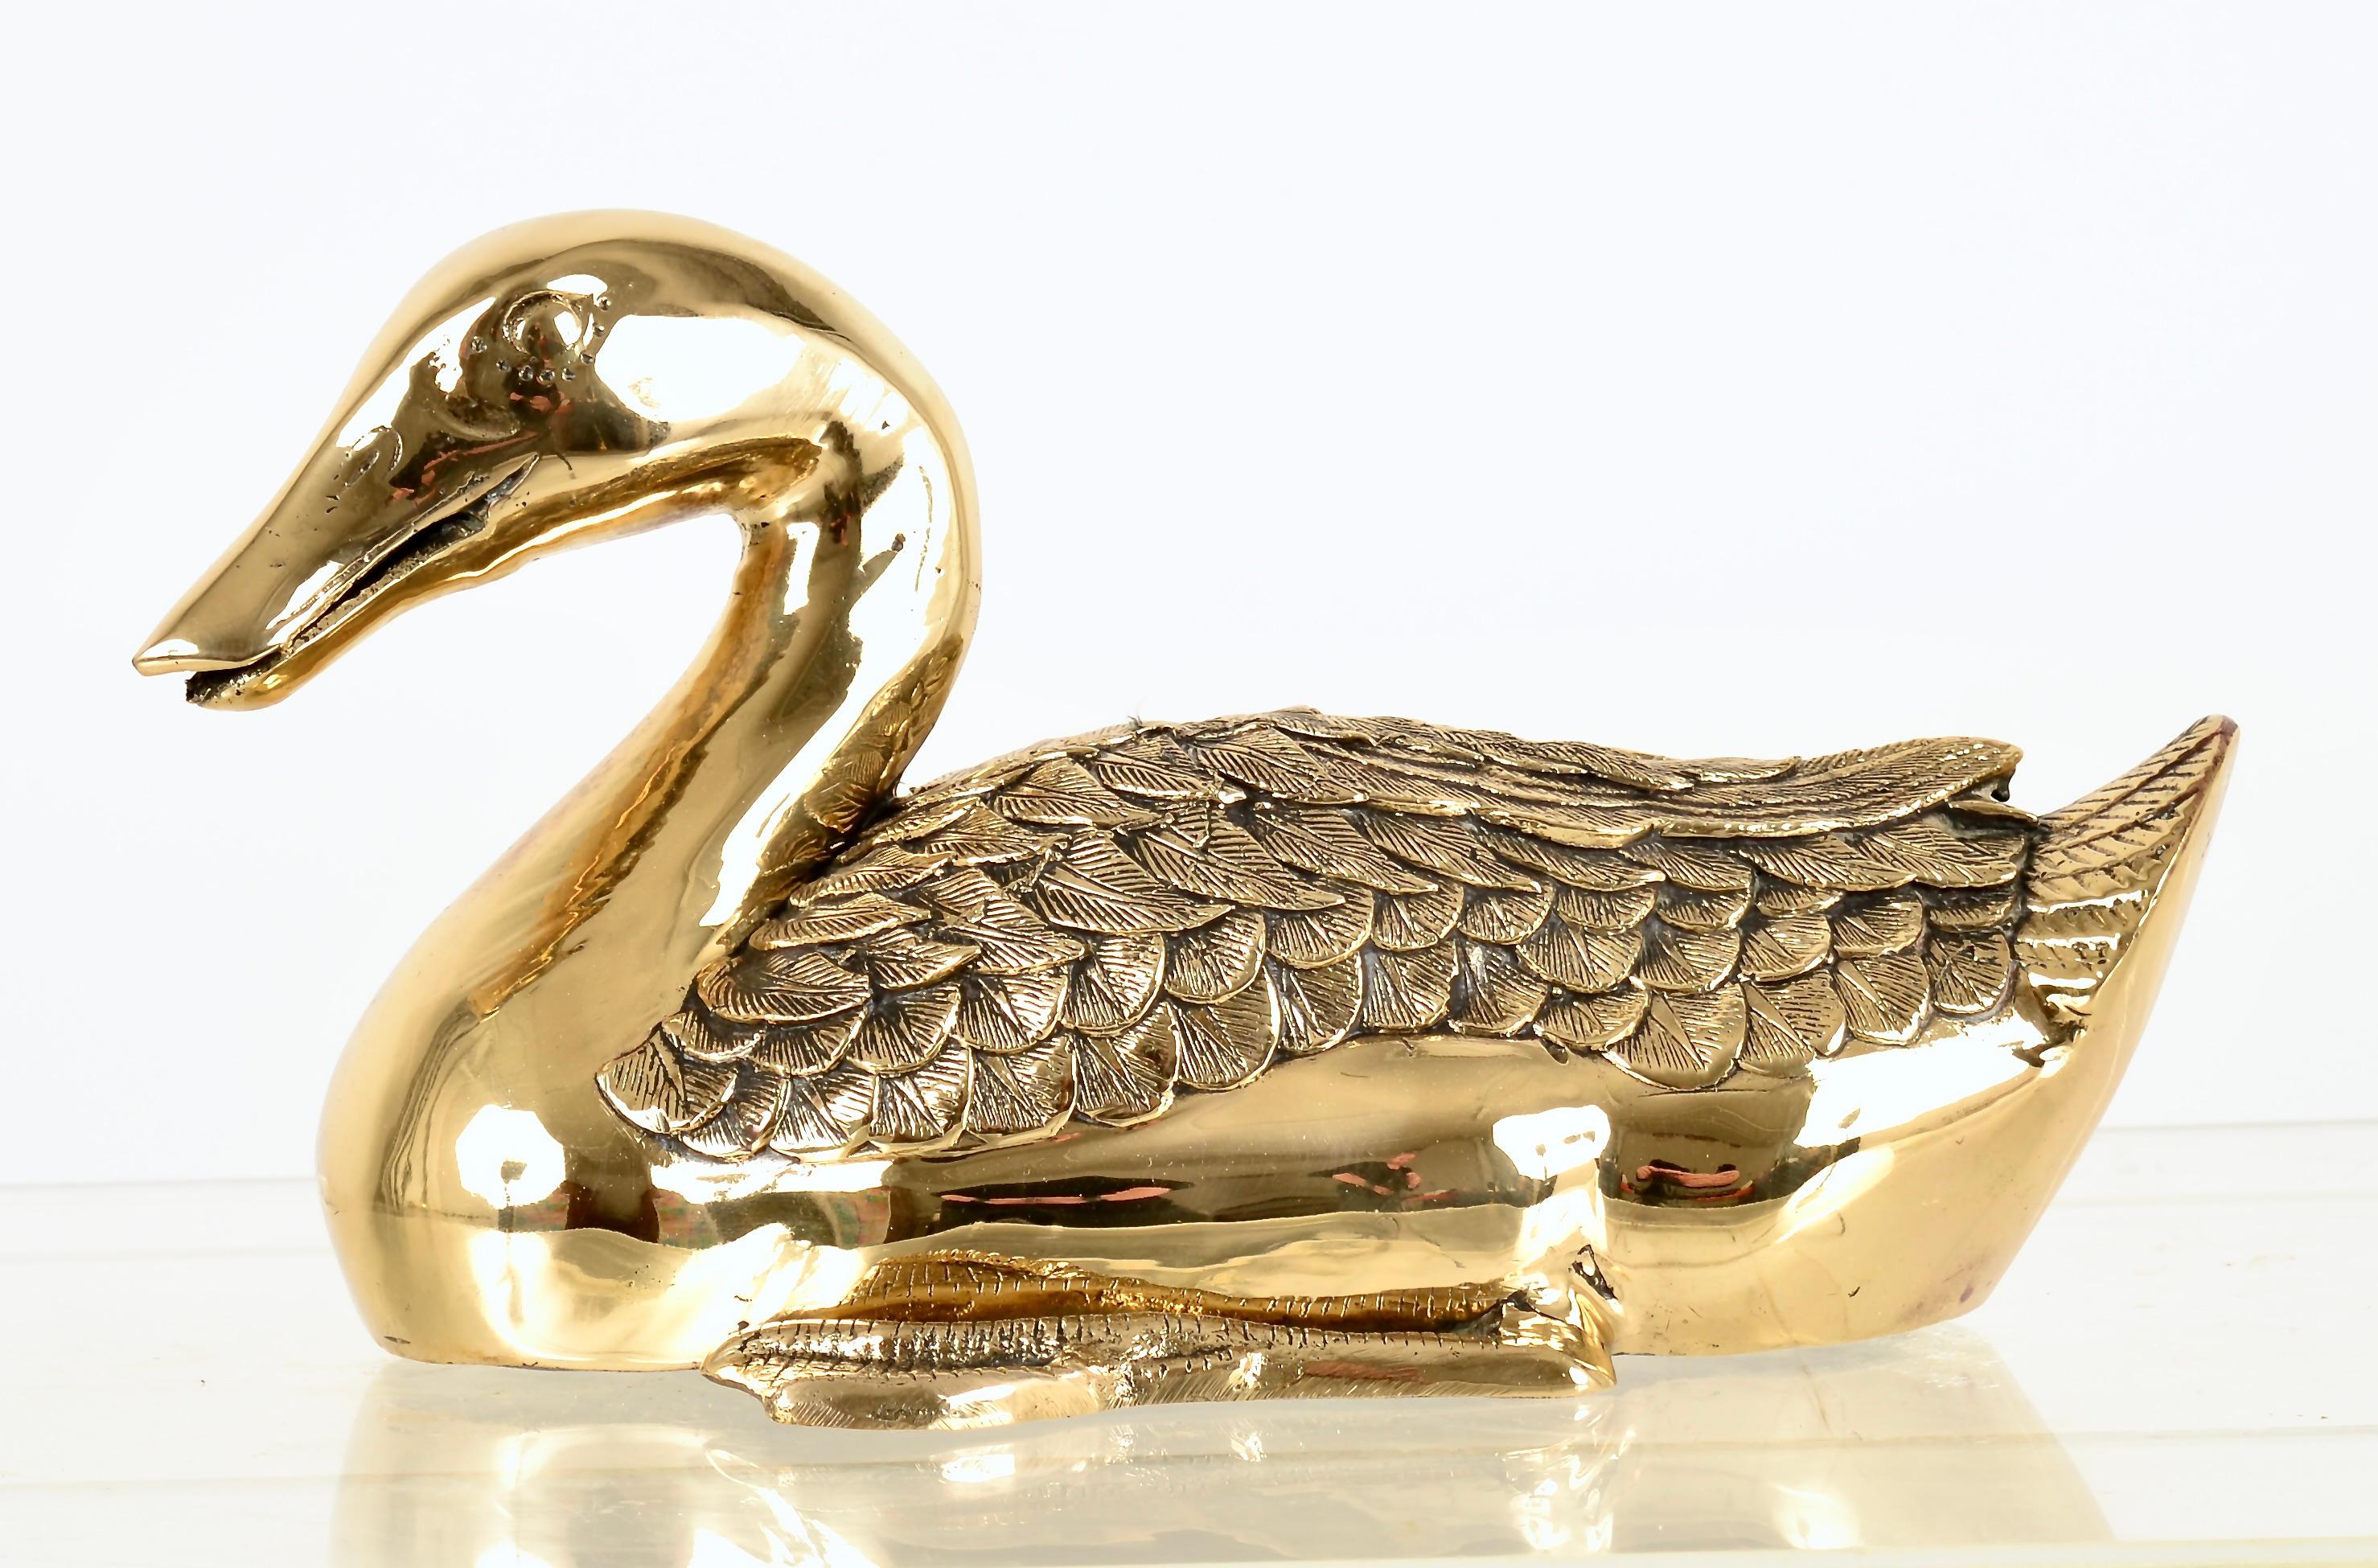 Beautifully made duck sculpture. Note the fine detail of the feathers and the foot. This piece is solid brass, quite heavy and a nice size at almost a foot long. Exceptional quality and fine attention to detail. It is newly polished and lacquered.